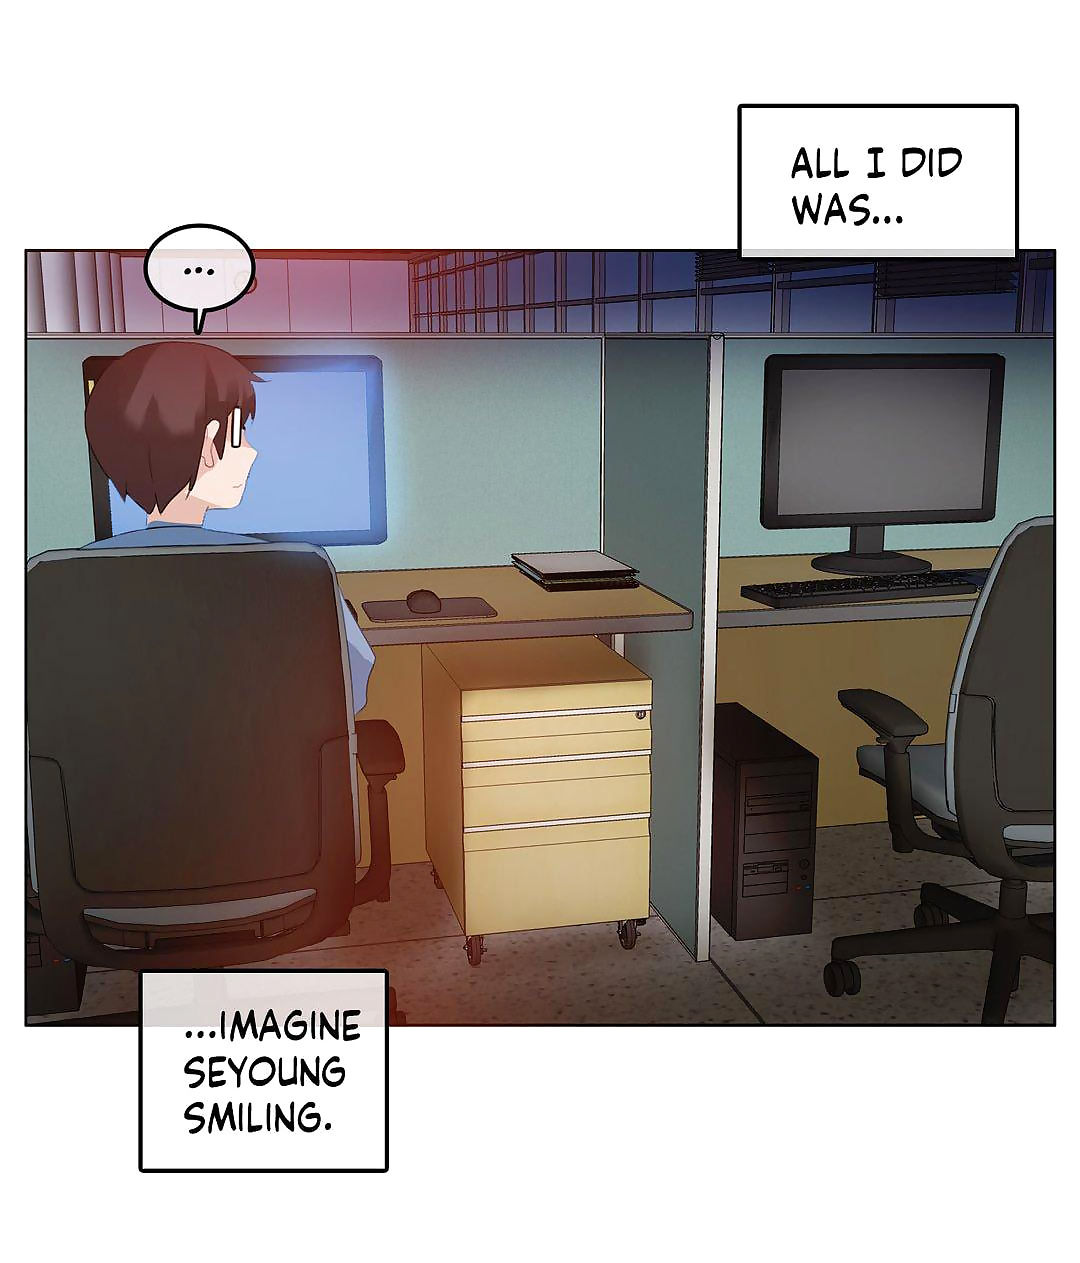 A Perverts Daily Life • Chapter 23: In the Office?! Netorare World